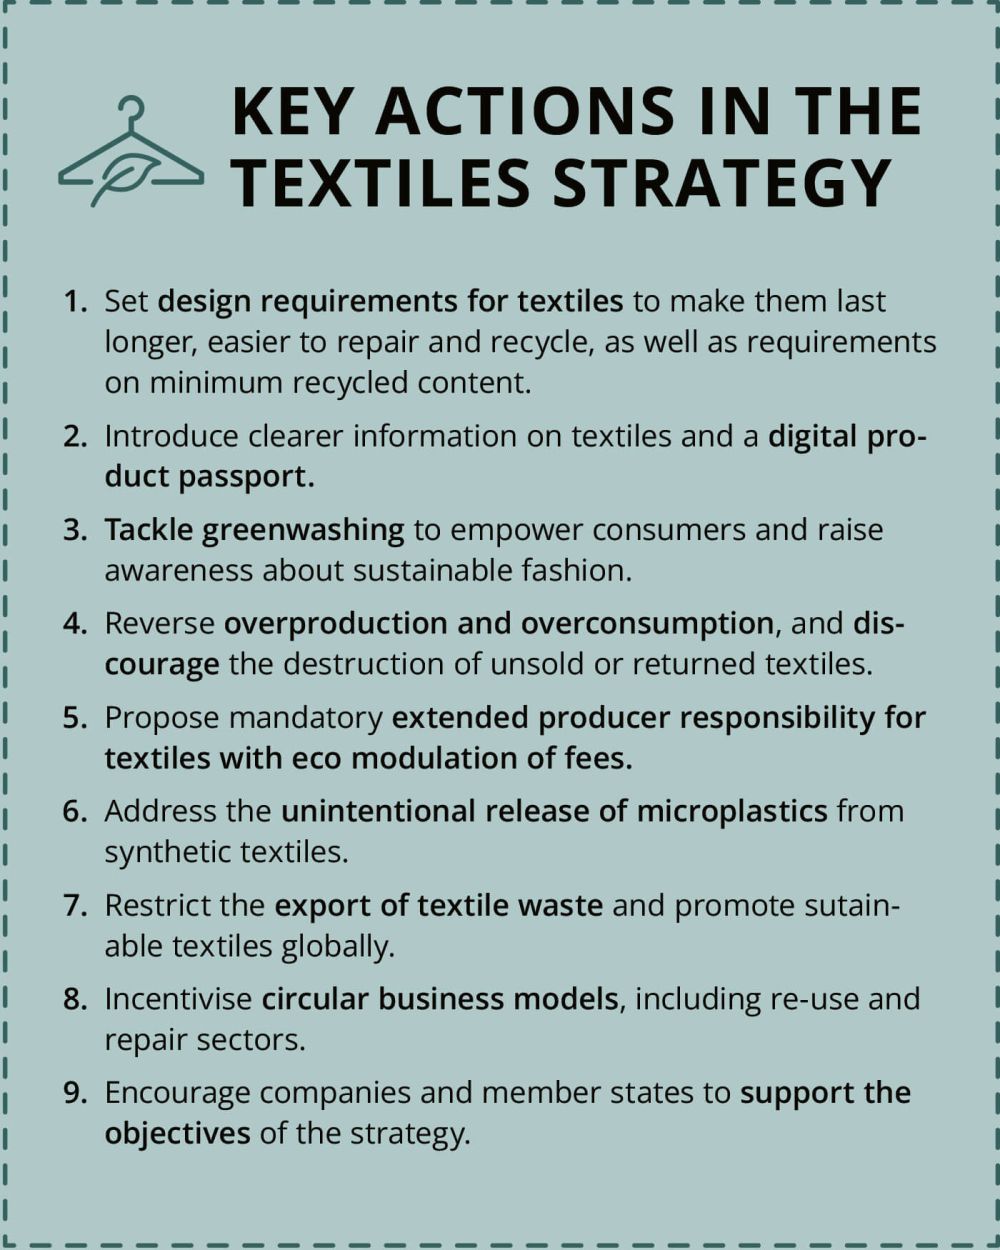 Key actions in the textiles strategy